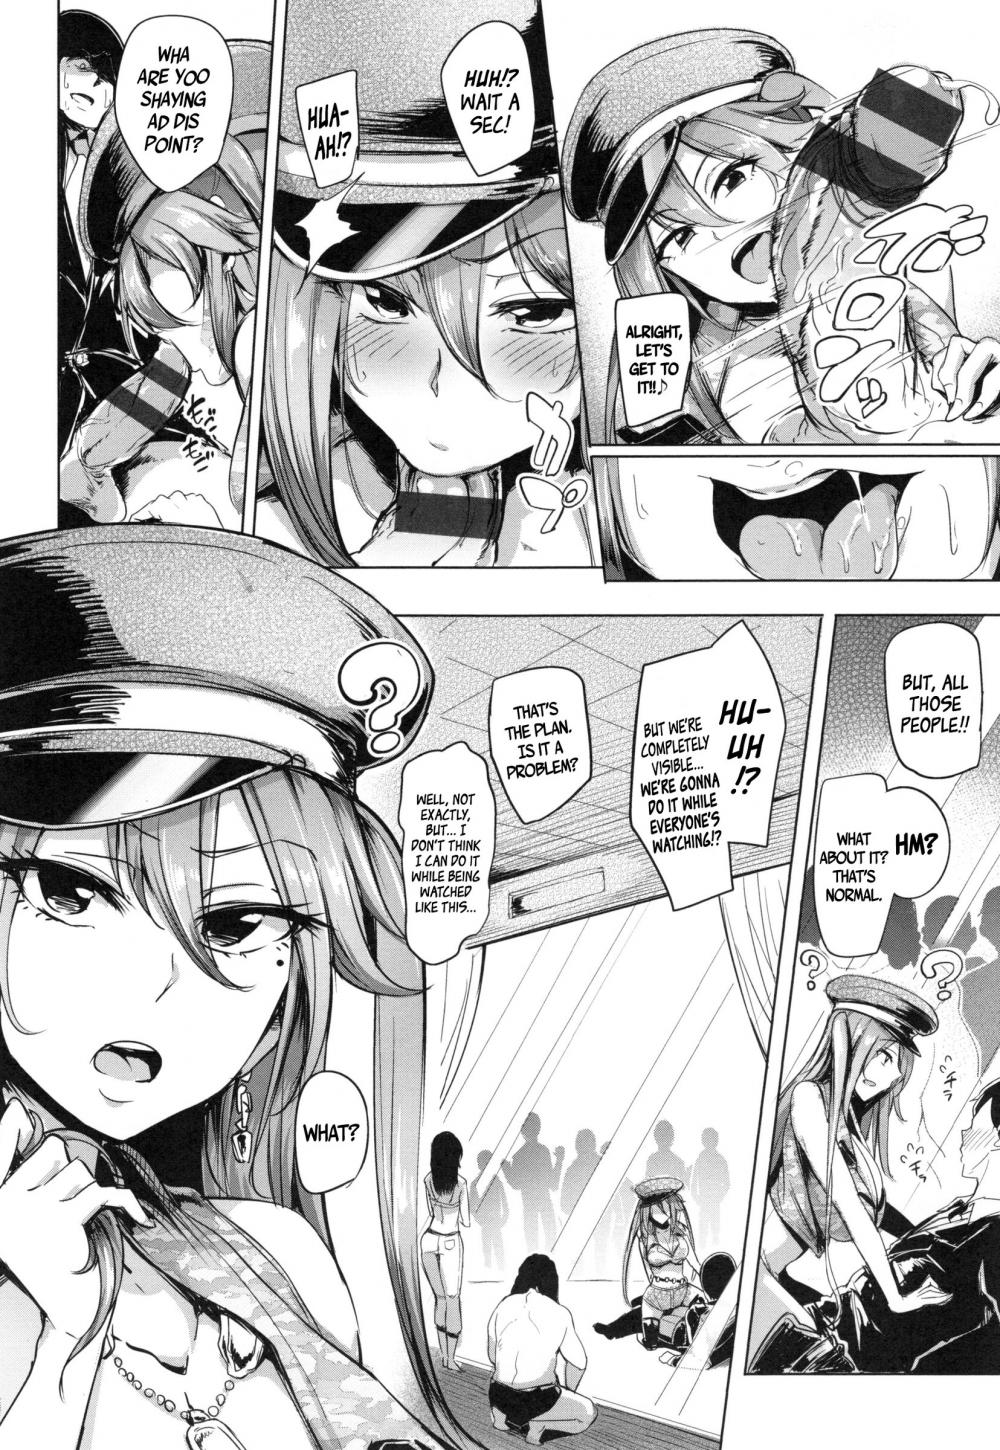 Comic Porn Black Sluts Fucking - One Night Stand with a Gyaru Slut! + Fucking a Gyaru Slut!-Read-Hentai  Manga Hentai Comic - Page: 9 - Online porn video at mobile